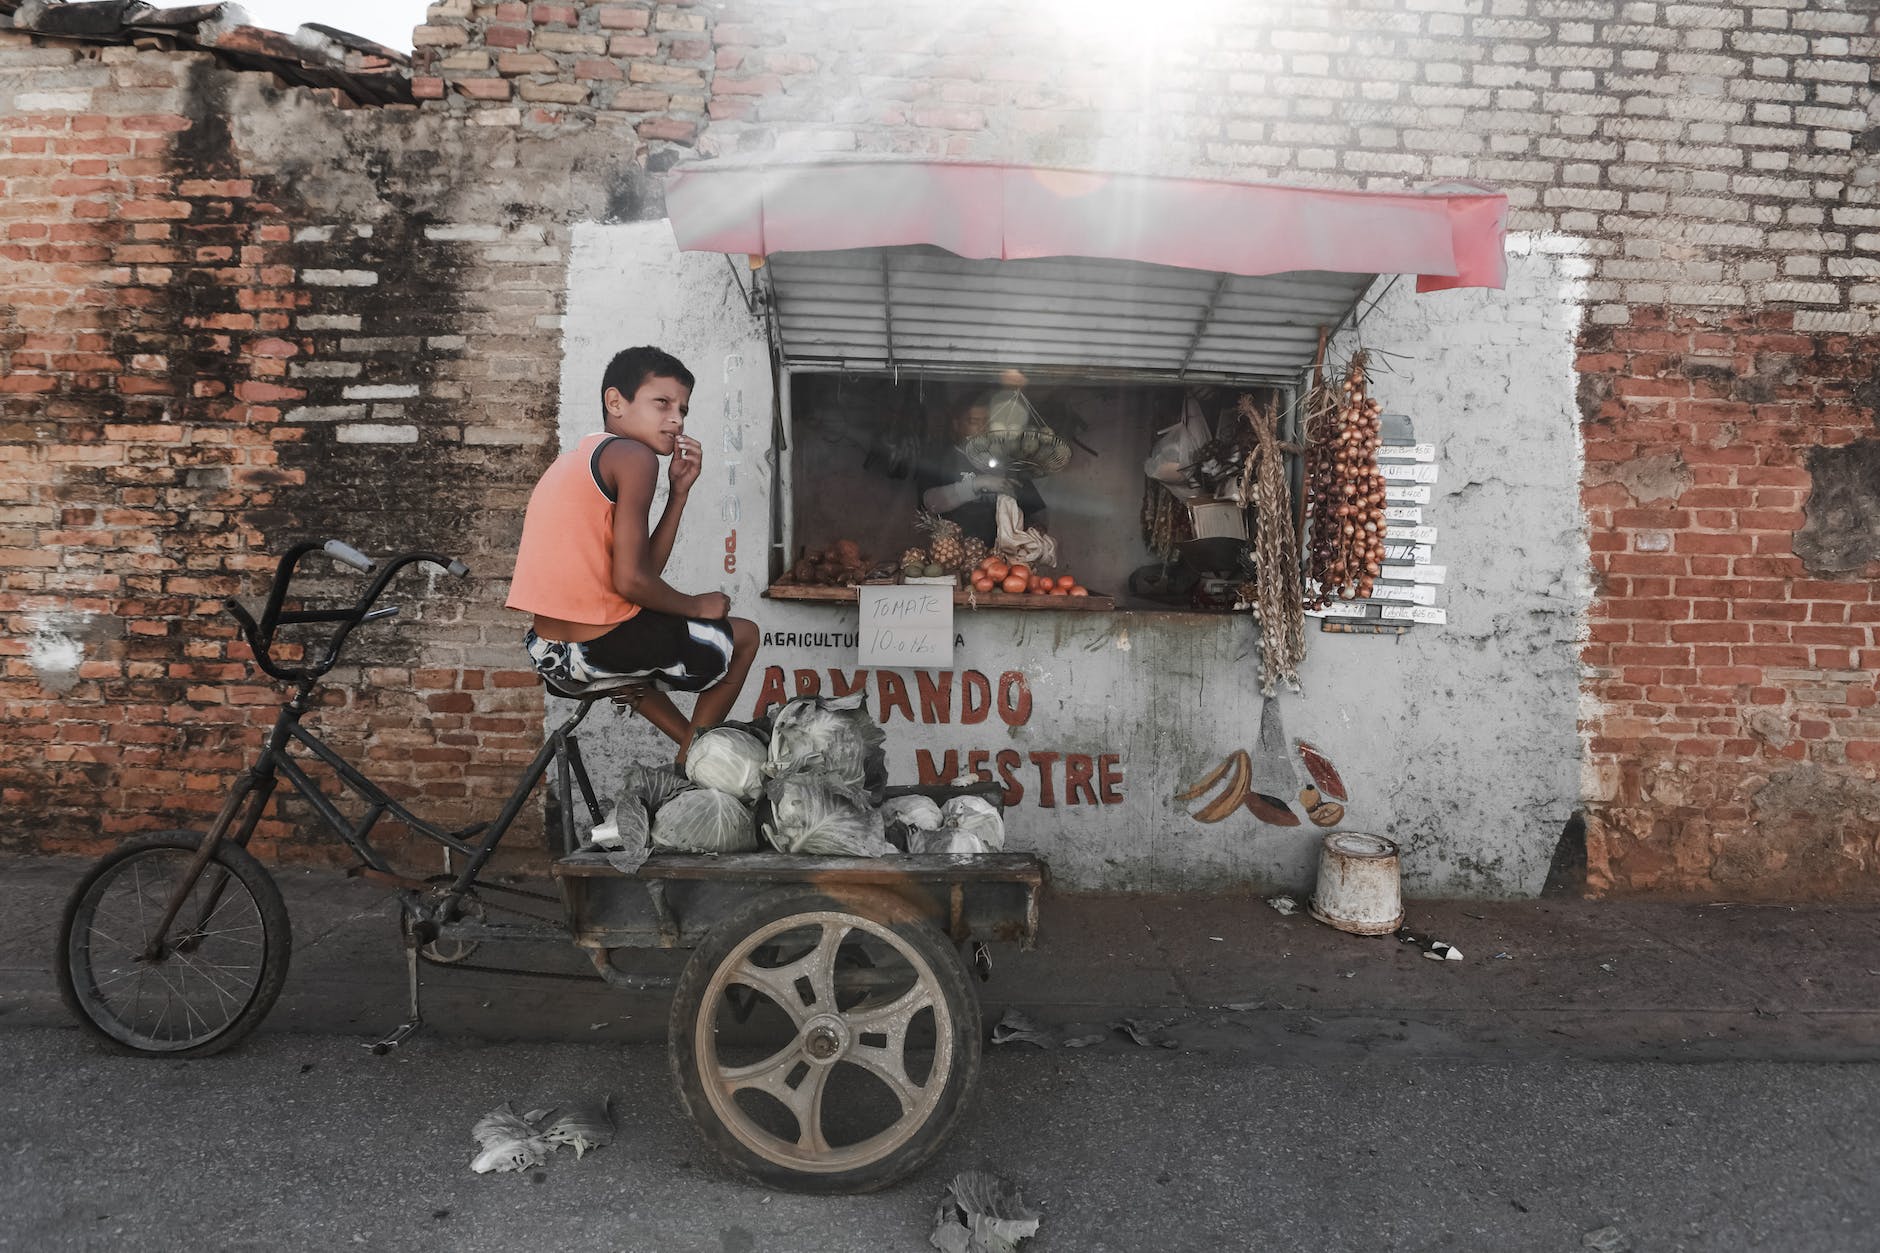 ethnic boy sitting on aged tricycle near poor street stall